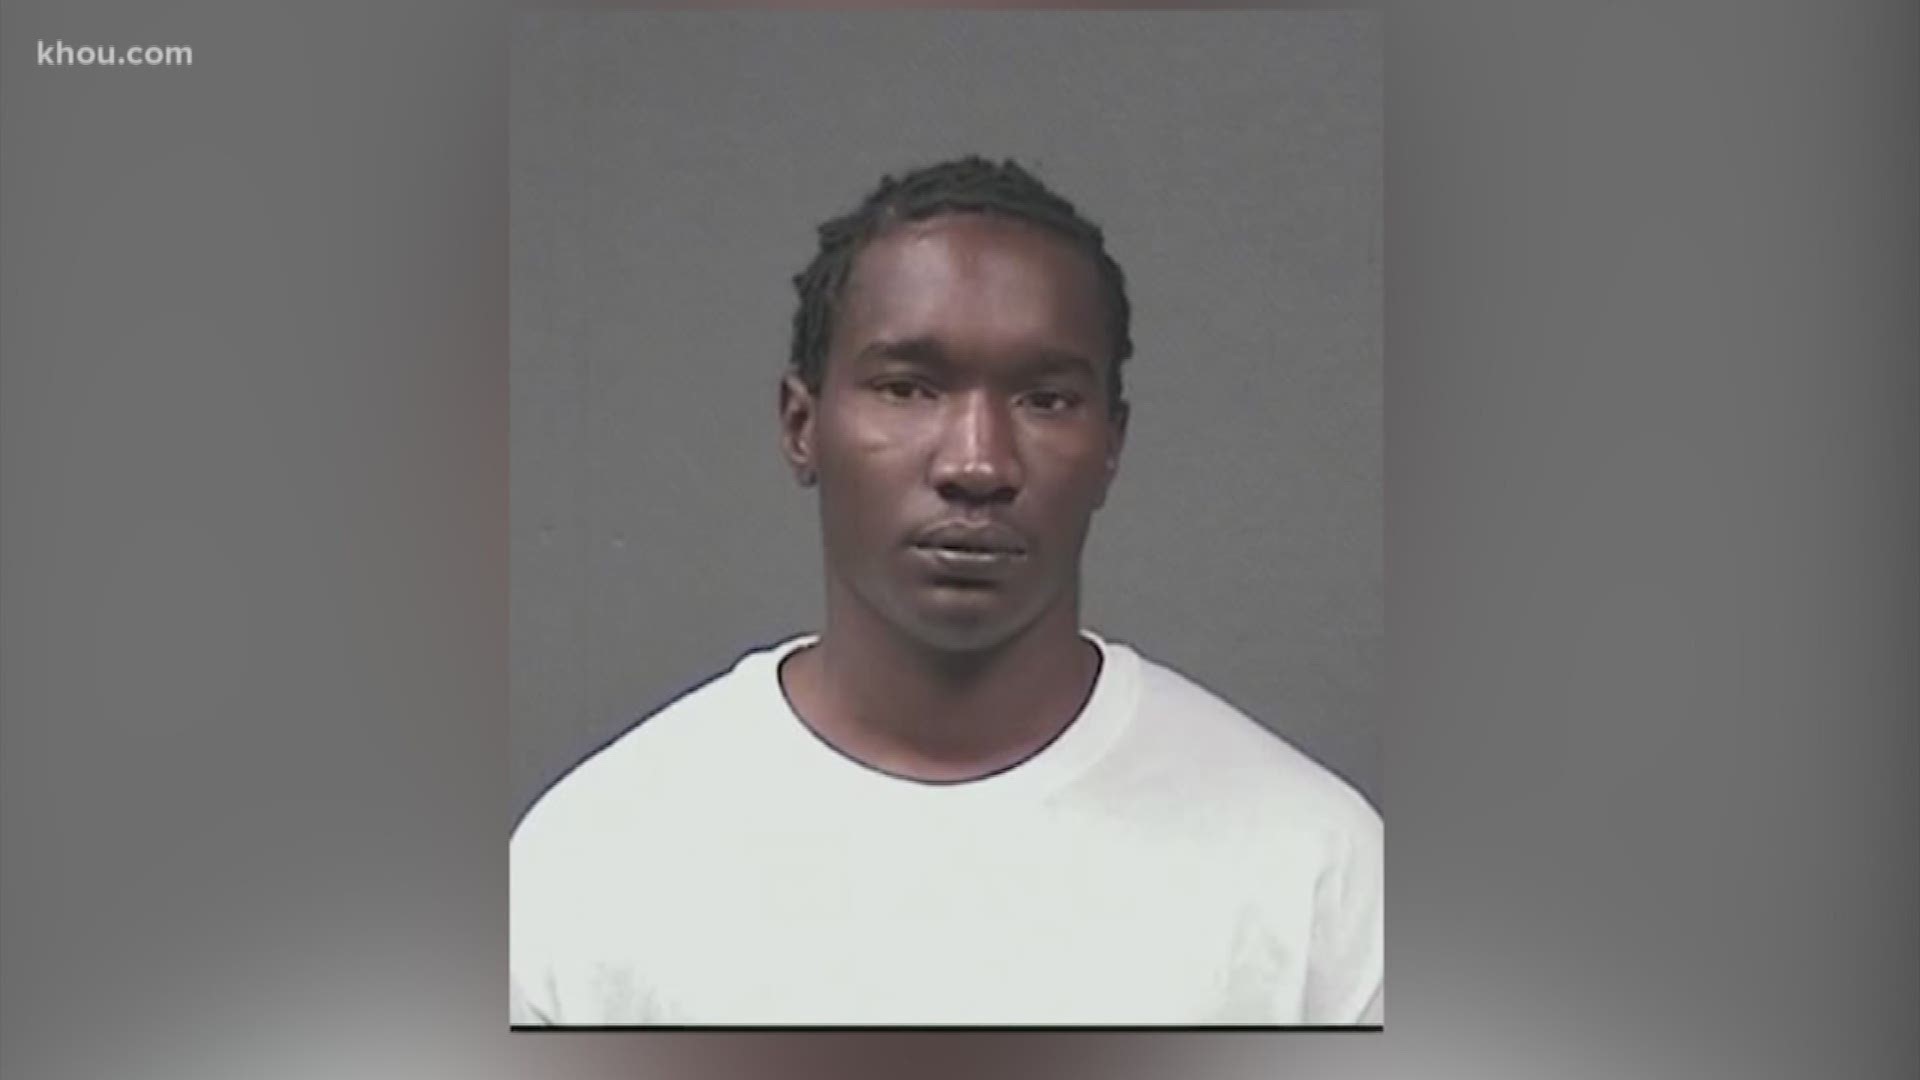 Houston police are looking for a man wanted for questioning in the fatal shooting of two men in southwest Houston in May 2019.